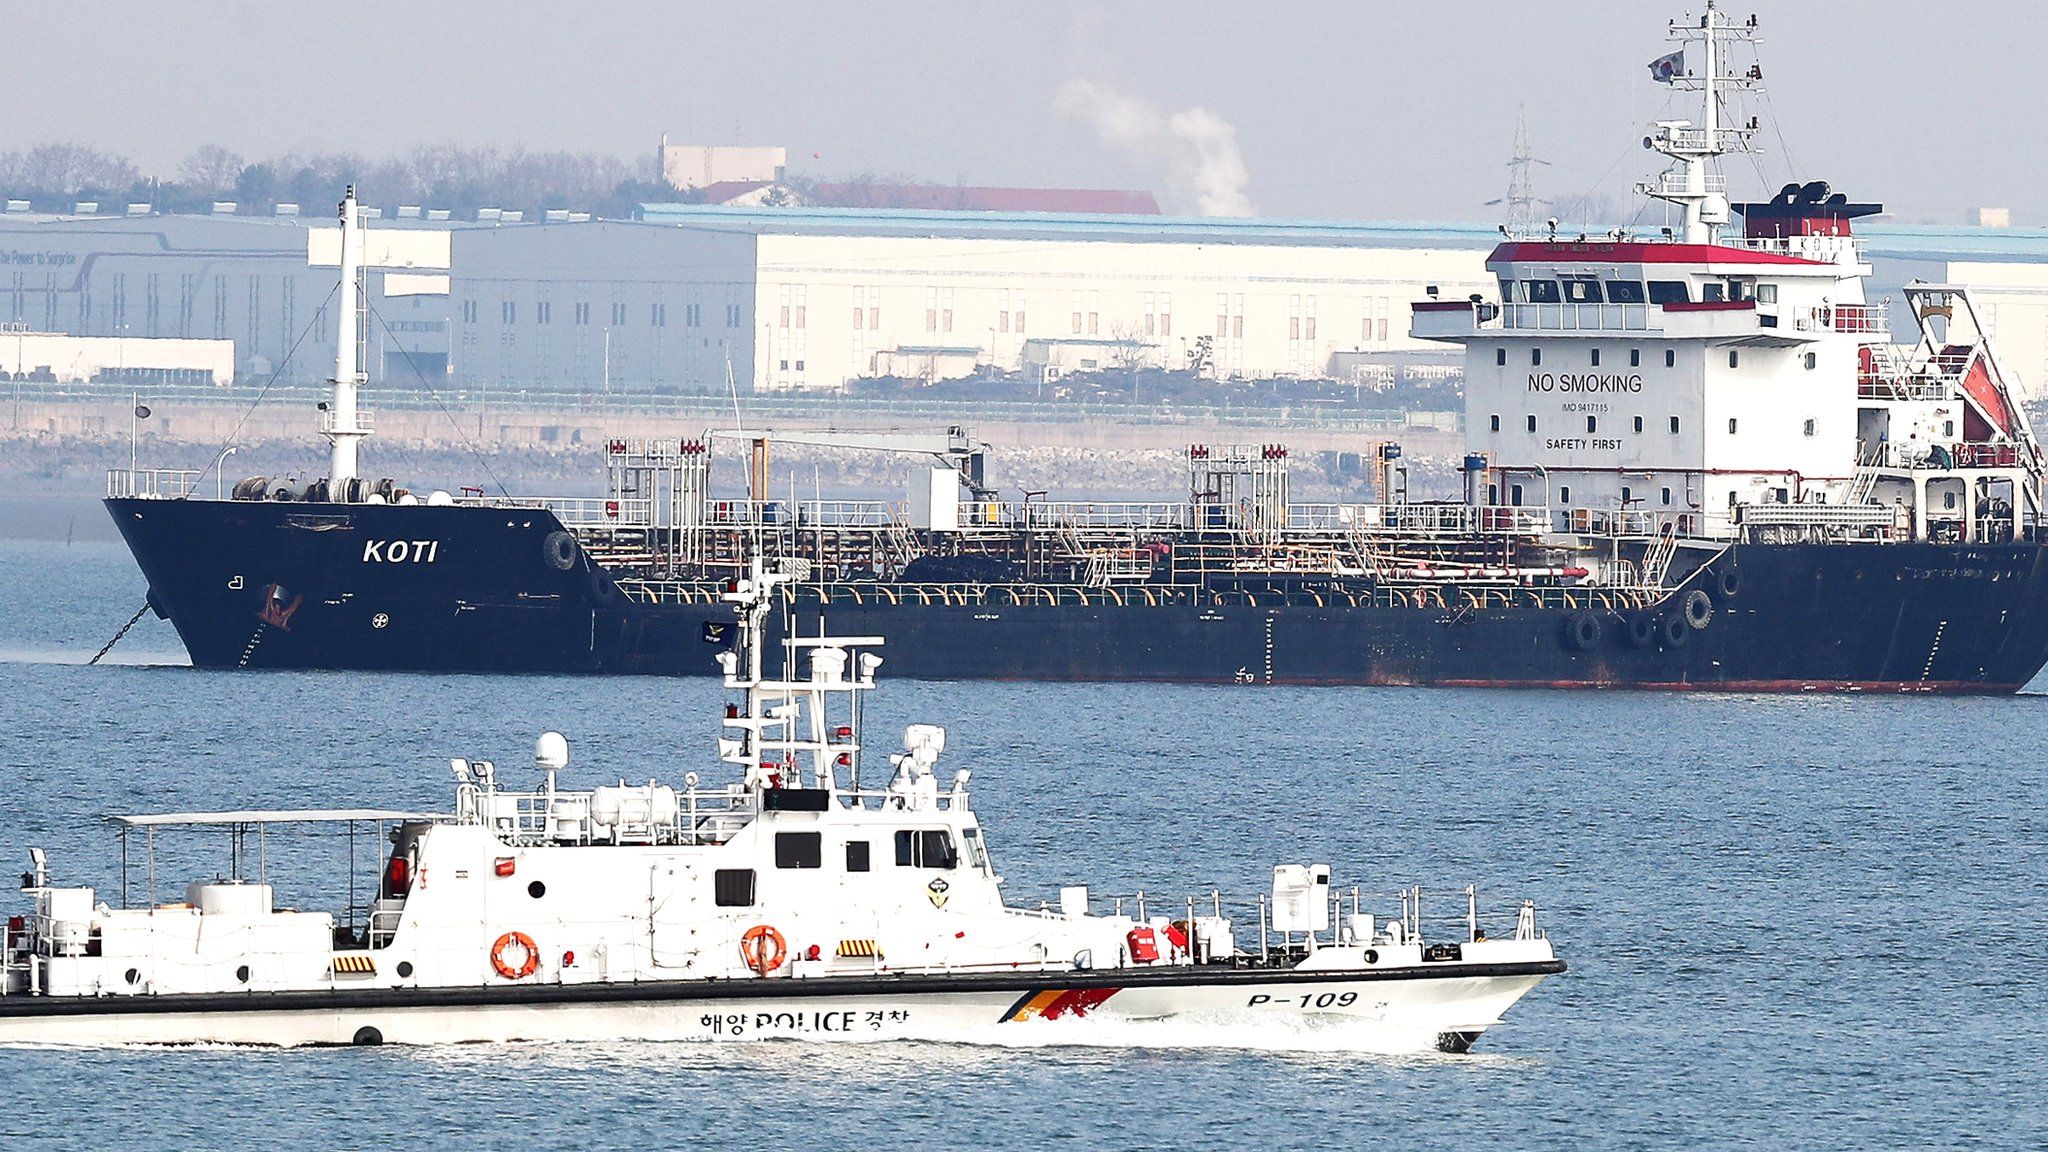 Panama-flagged ship suspected of transferring oil products to North Korea in violation of sanctions, in the sea off Pyeongtaek, South Korea, 1 January 2018